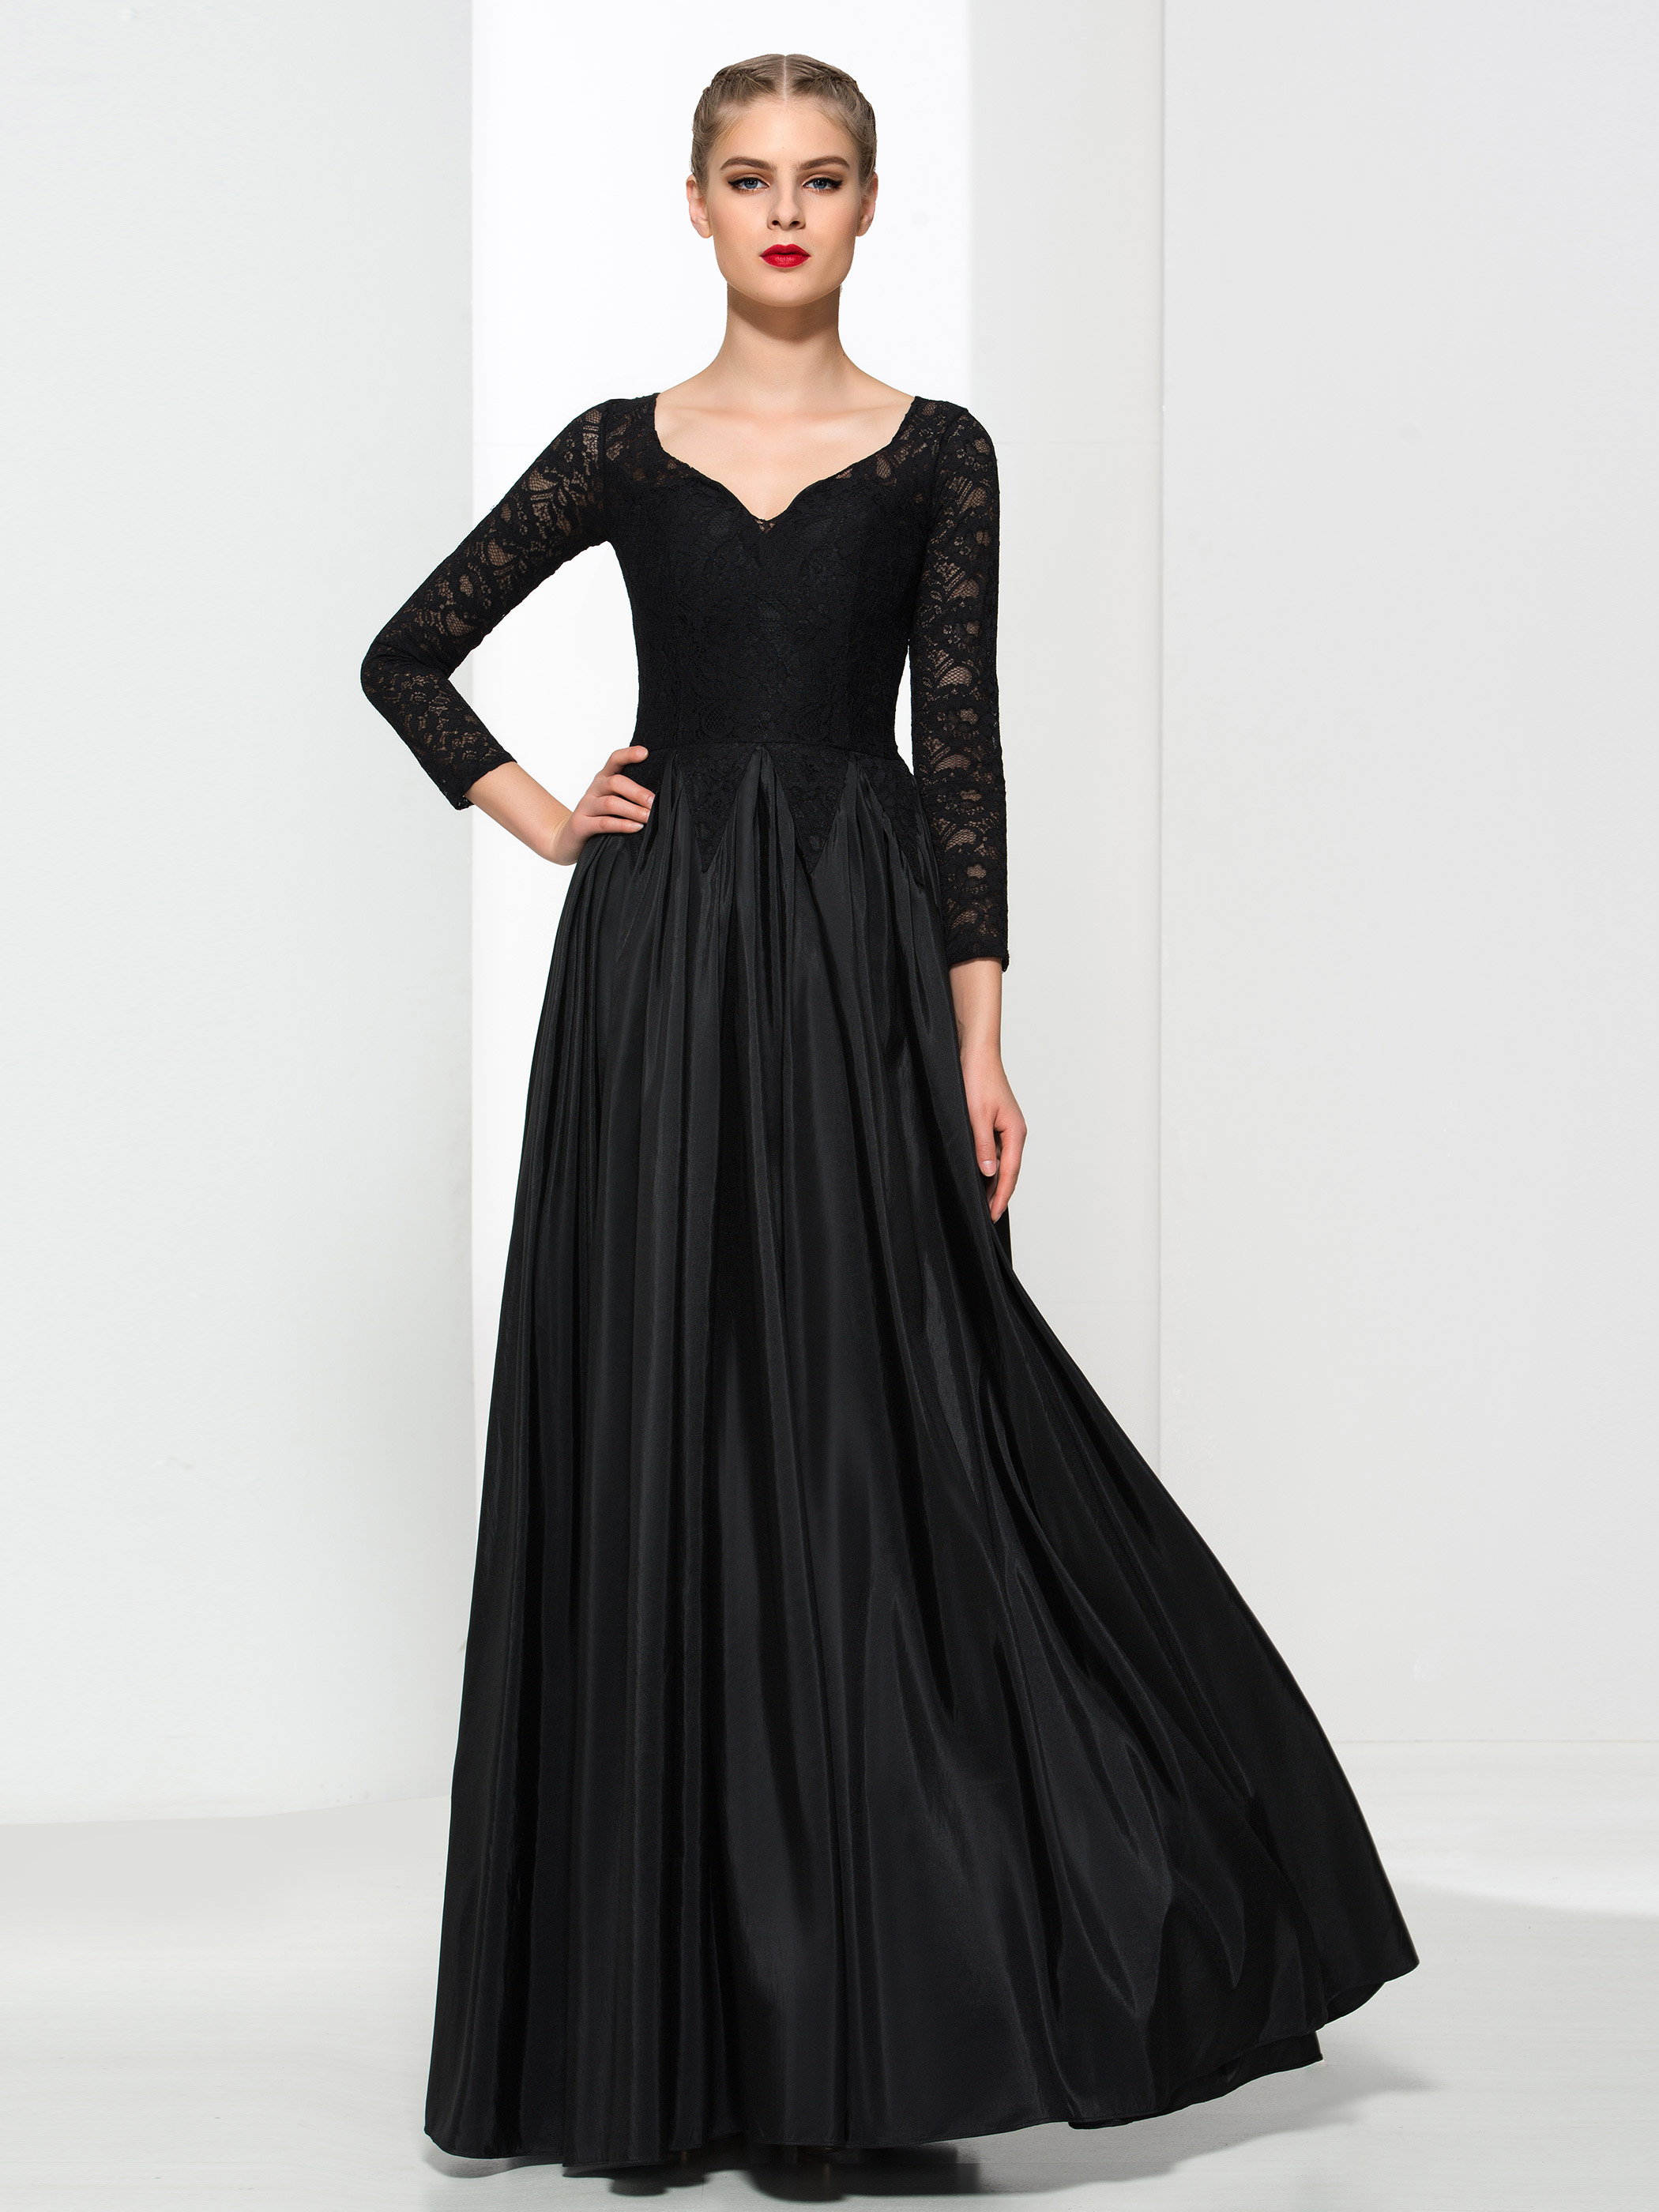 Ericdress V-Neck 3/4 Length Sleeves Lace Evening Dress